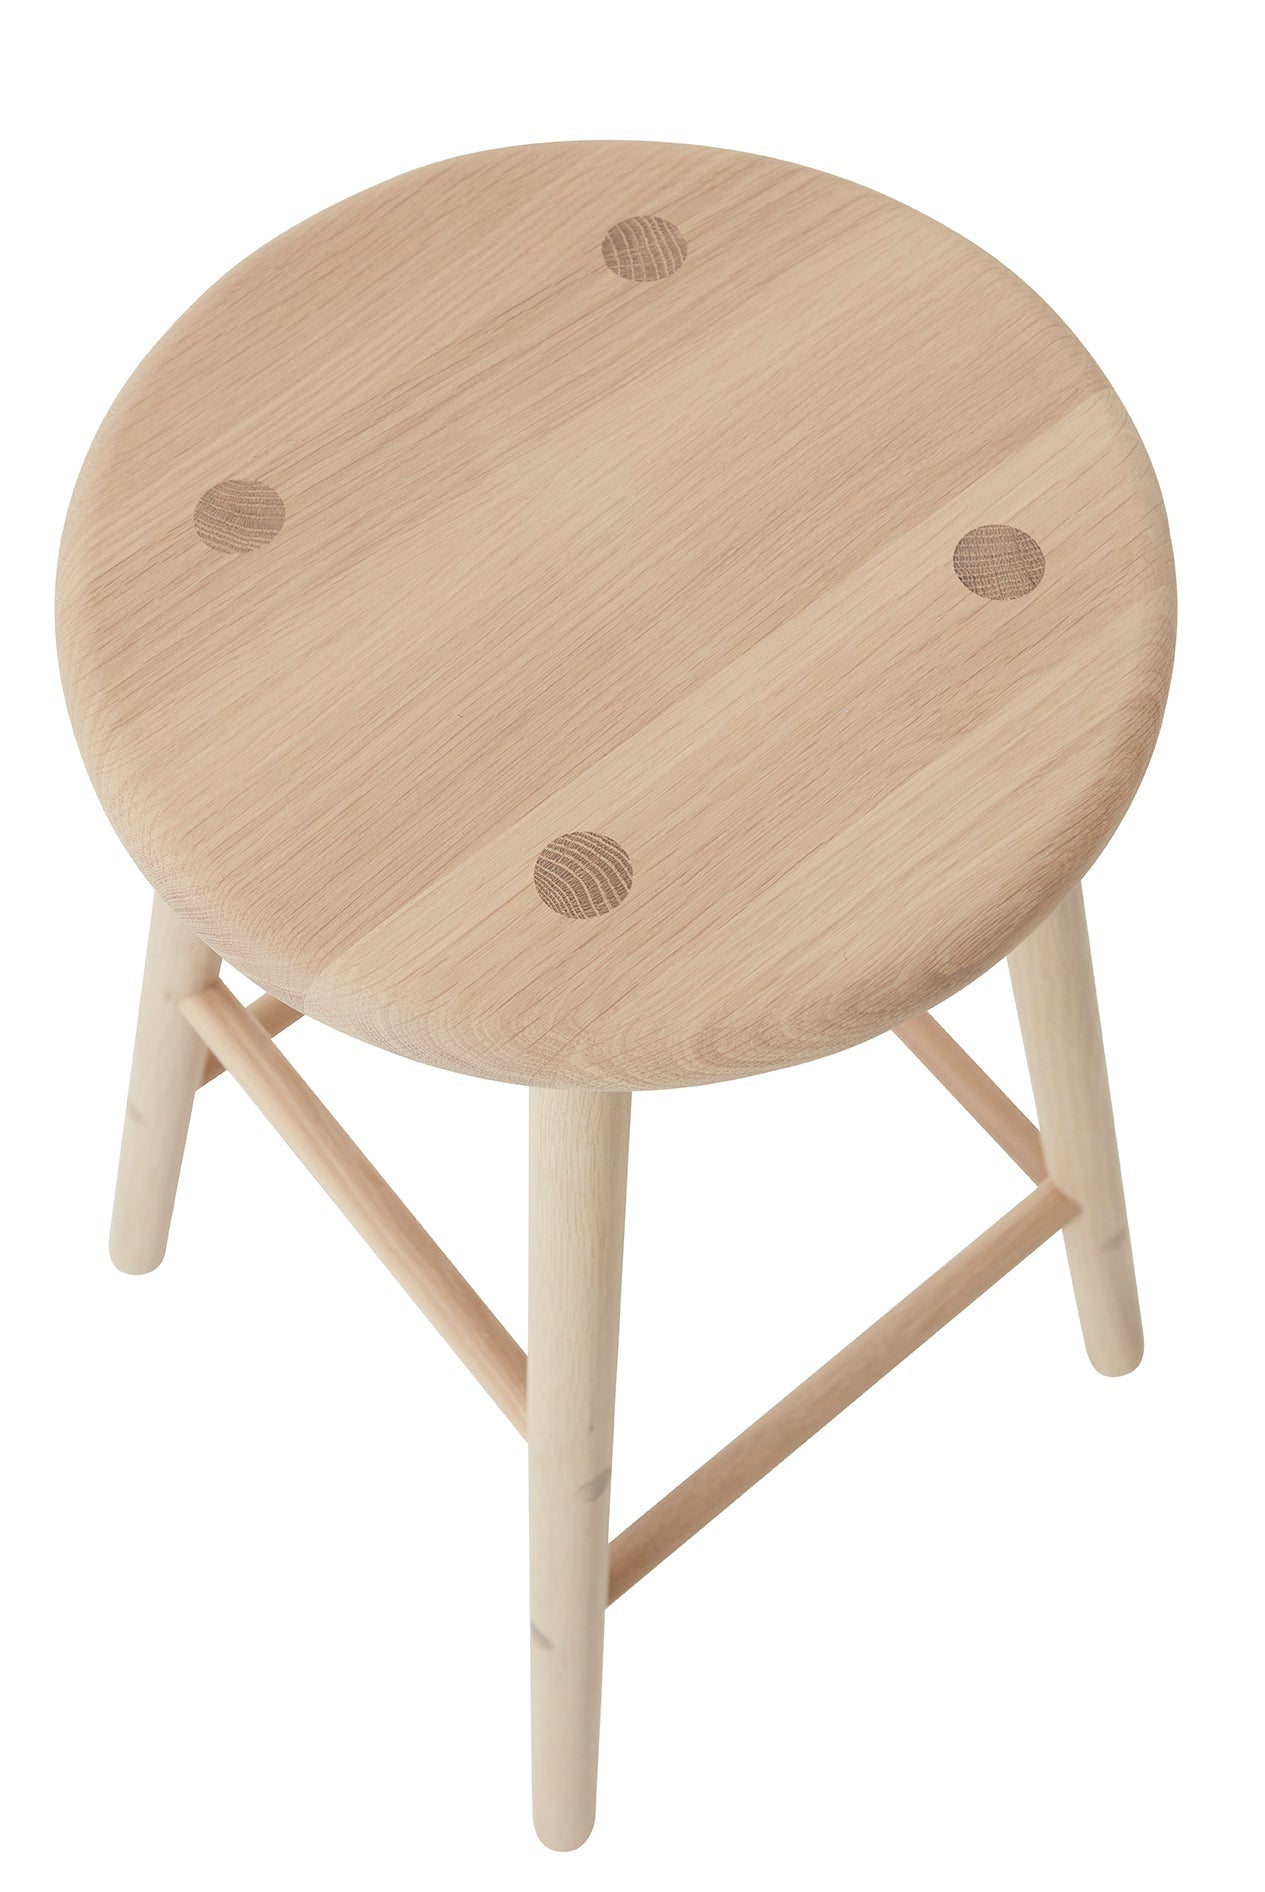 Load image into Gallery viewer, OYOY LIVING Moto Stool - Low Stool 901 Nature
